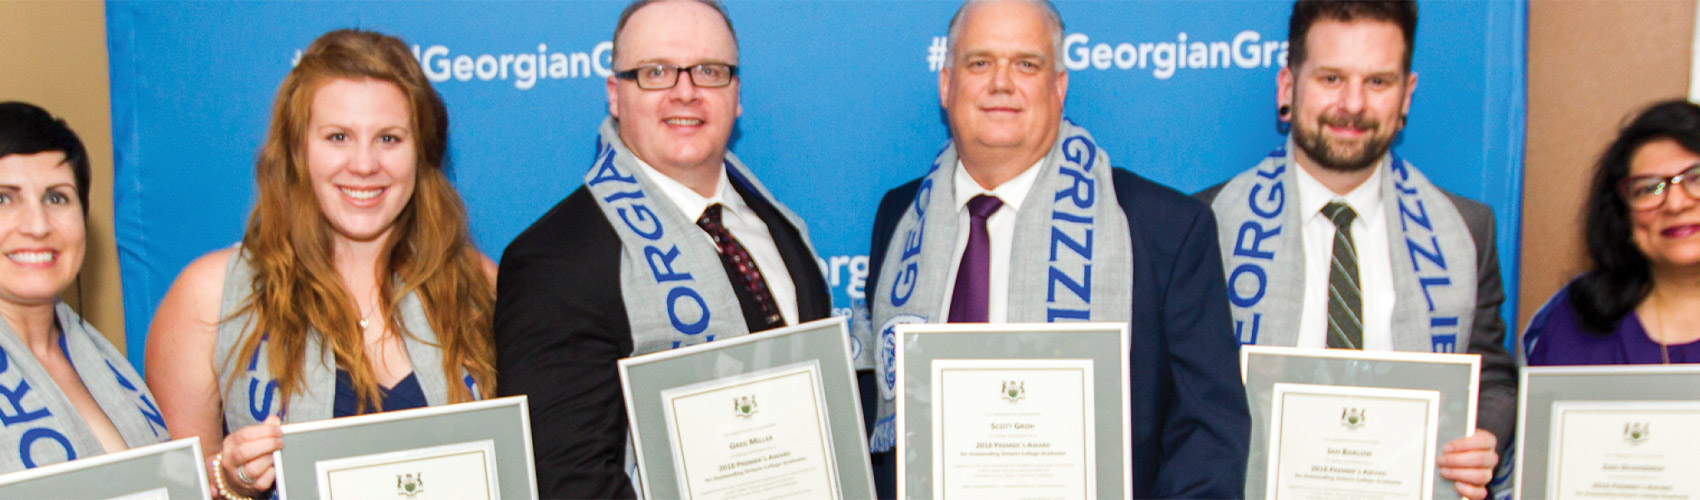 A group of people holding framed certificates while wearing gray and blue "GEORGIAN GRIZZLIES" knit scarves around their necks